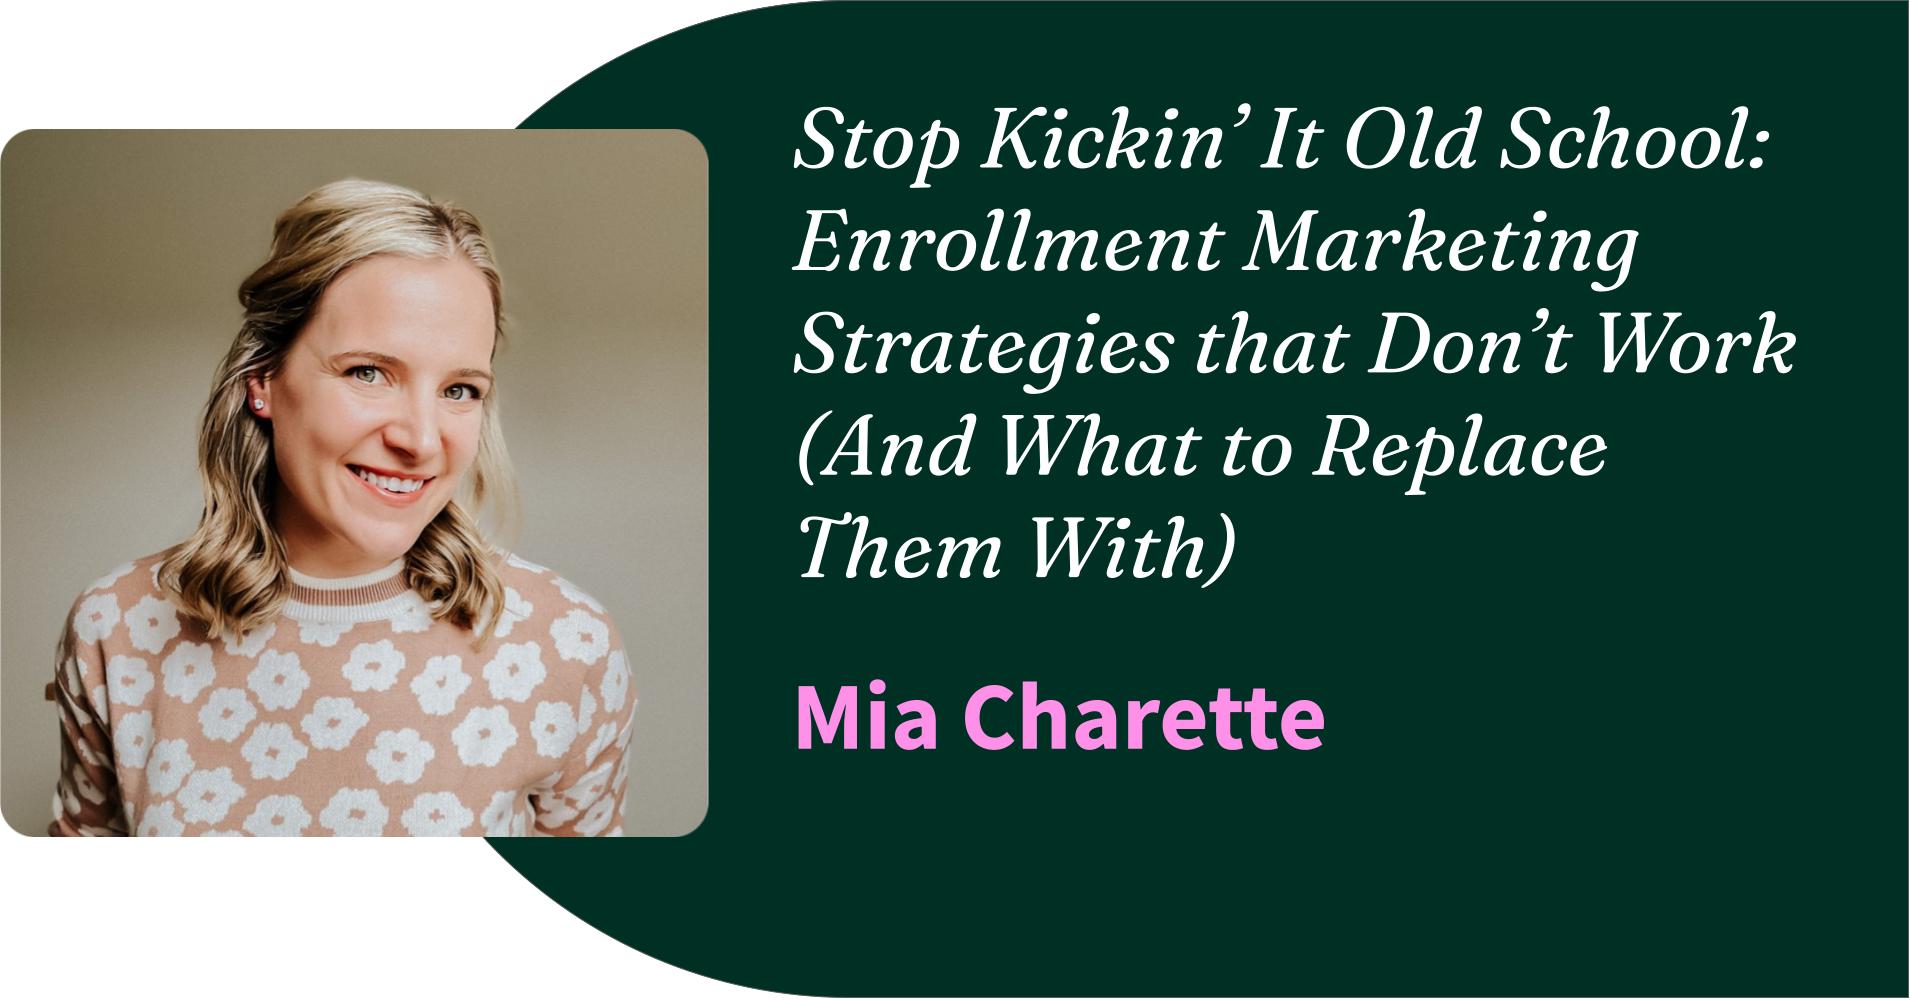 Stop Kickin’ It Old School: Enrollment Marketing Strategies that Don’t Work (And What to Replace Them With)